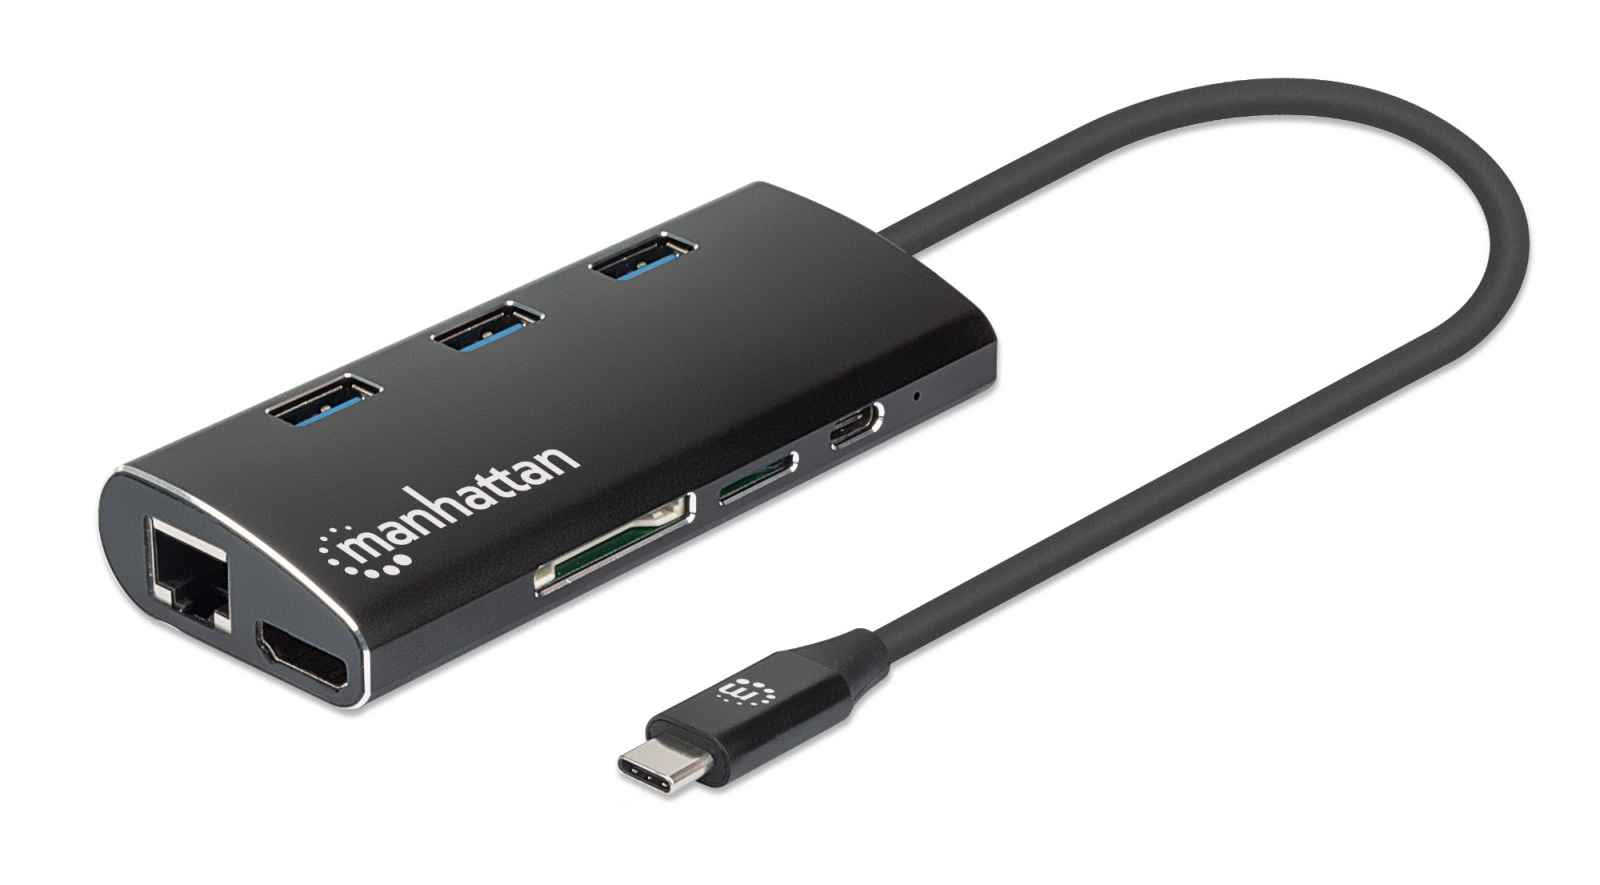 Manhattan USB-C Dock/Hub with Card Reader, Ports (x6): Ethernet, HDMI, USB-A (x3) and USB-C, With Power Delivery (100W) to USB-C Port (Note additional USB-C wall charger and USB-C cable needed), Equivalent to DKT30CSDHPD3, Aluminium, Black, 3 Year Warrant